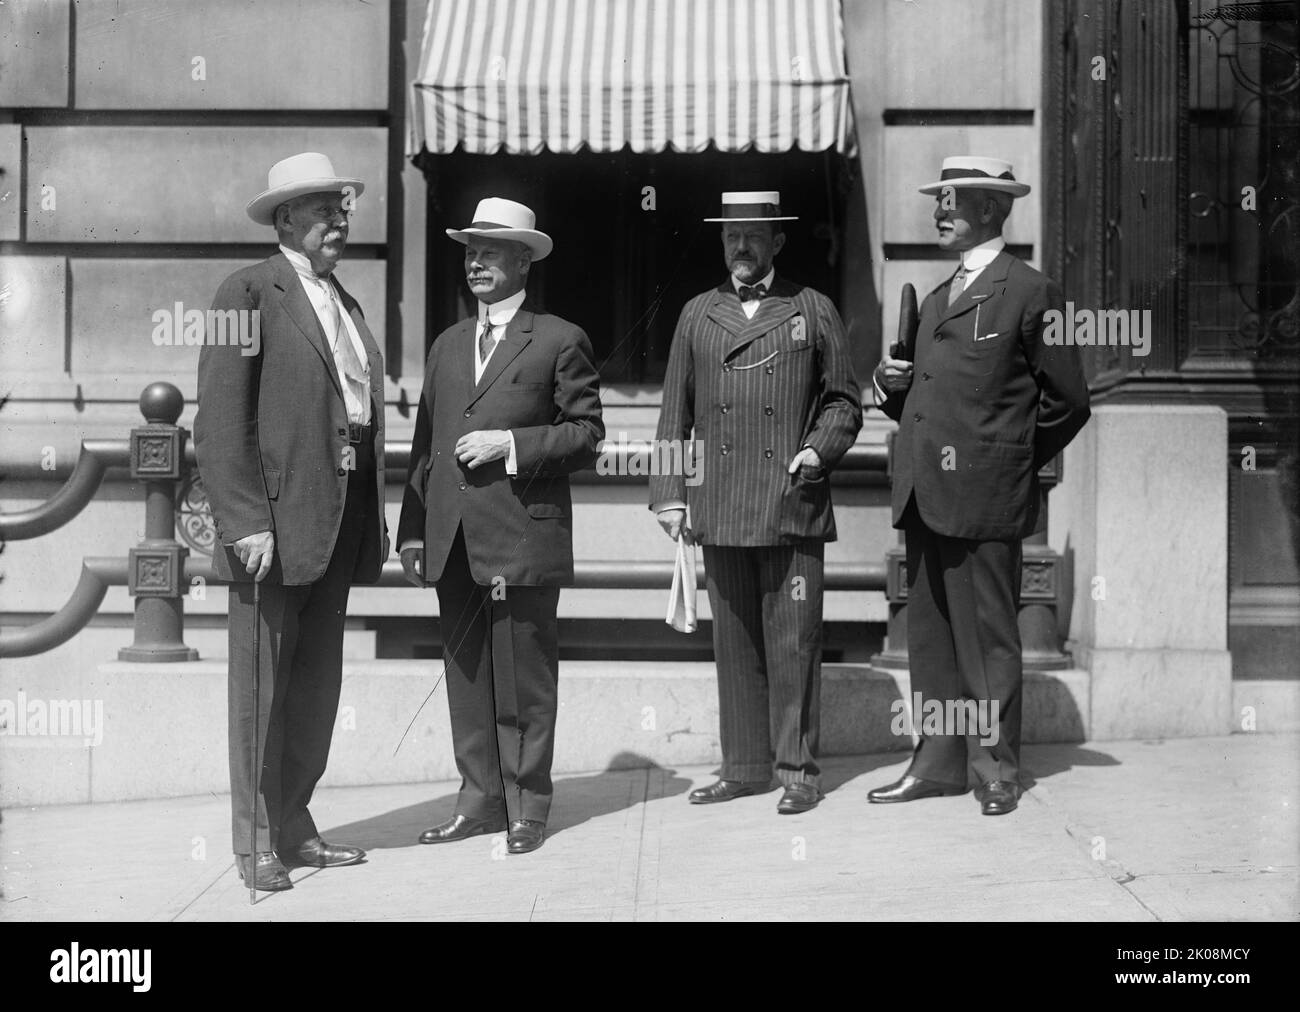 U.S. Steel Corporation, Richard Lindaburg, Norman B. Ream, Percival Roberts, and Elbert Henry Gary. [US businessmen: Norman Bruce Ream became a millionaire by investing in steel, railroads, insurance, and banking; Percival Roberts was a landowner and chief of Pencoyd Iron Works, and lawyer Elbert Henry Gary was a founder of U.S. Steel]. Stock Photo